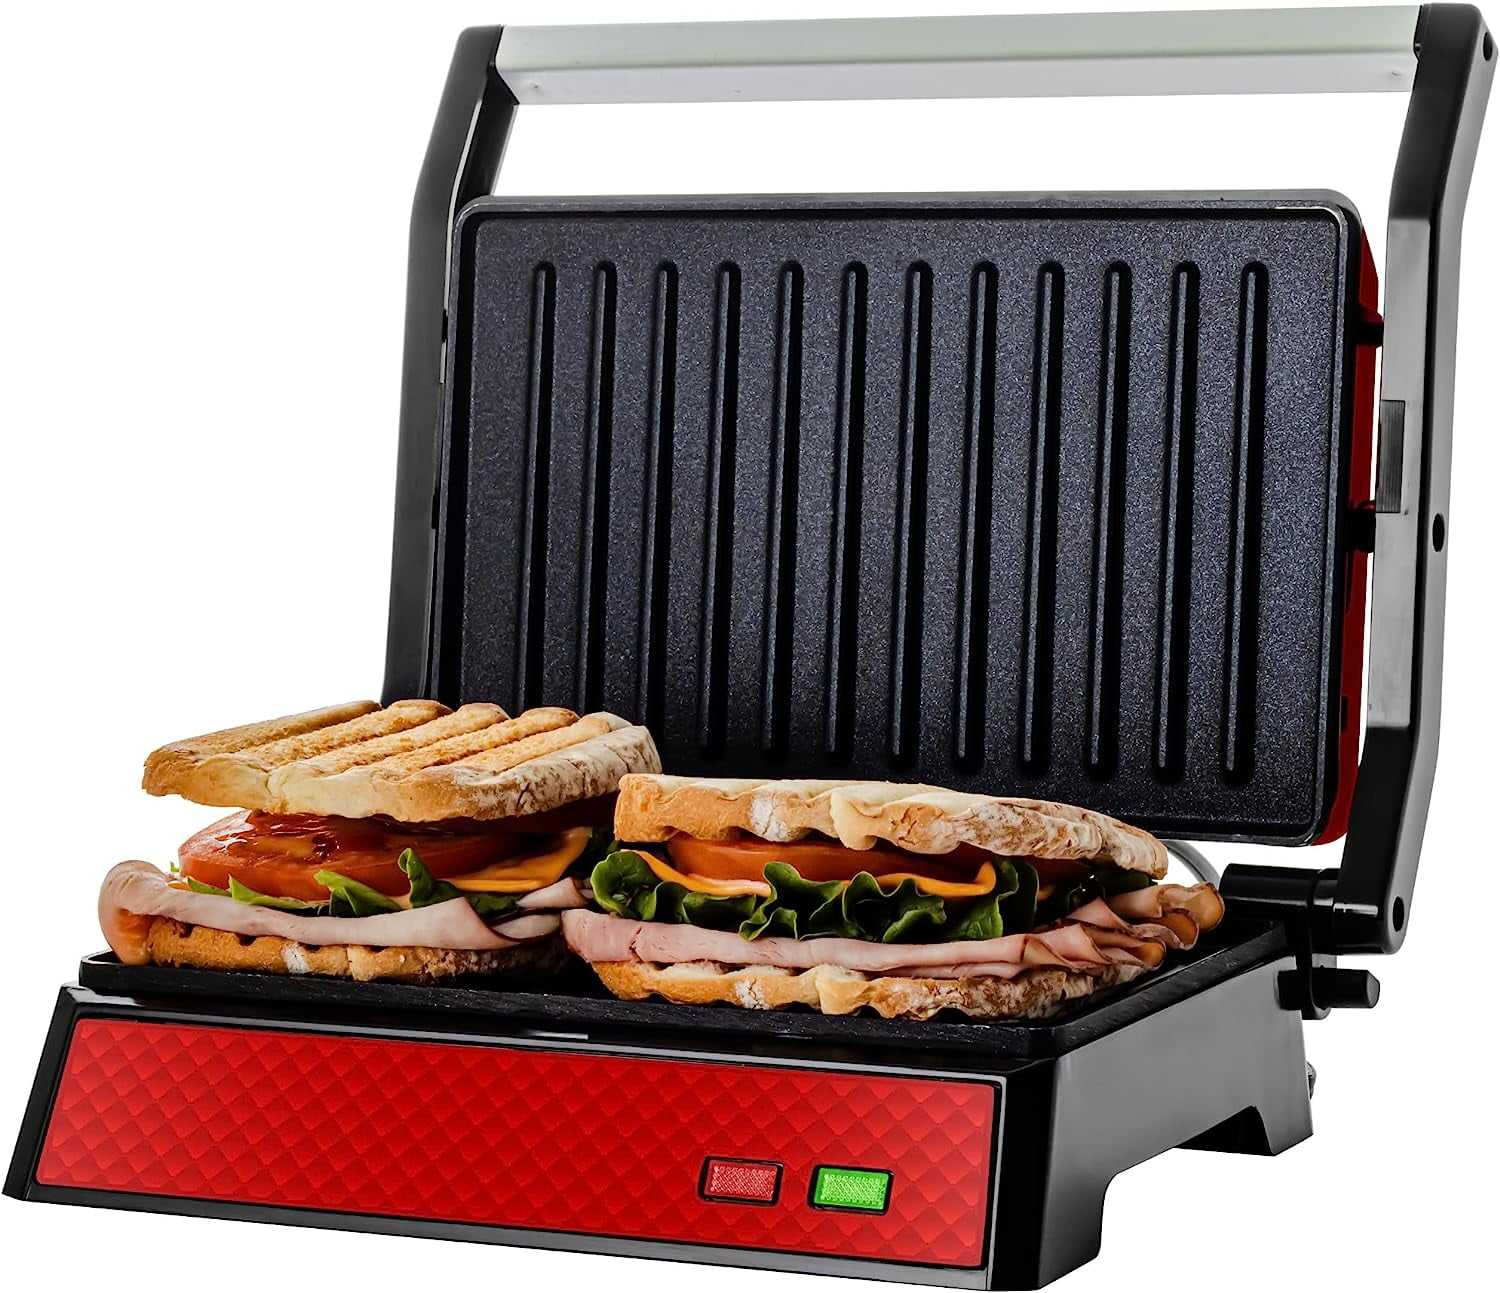  Sandwich Maker 3 in 1, Cookie Biscuit Maker with Removable  Plate, Electric Panini Press Grill, Sandwich Toaster with Detachable  Non-stick Coating,LED Indicator Lights, Cool Touch Handle, 1400W,Black:  Home & Kitchen